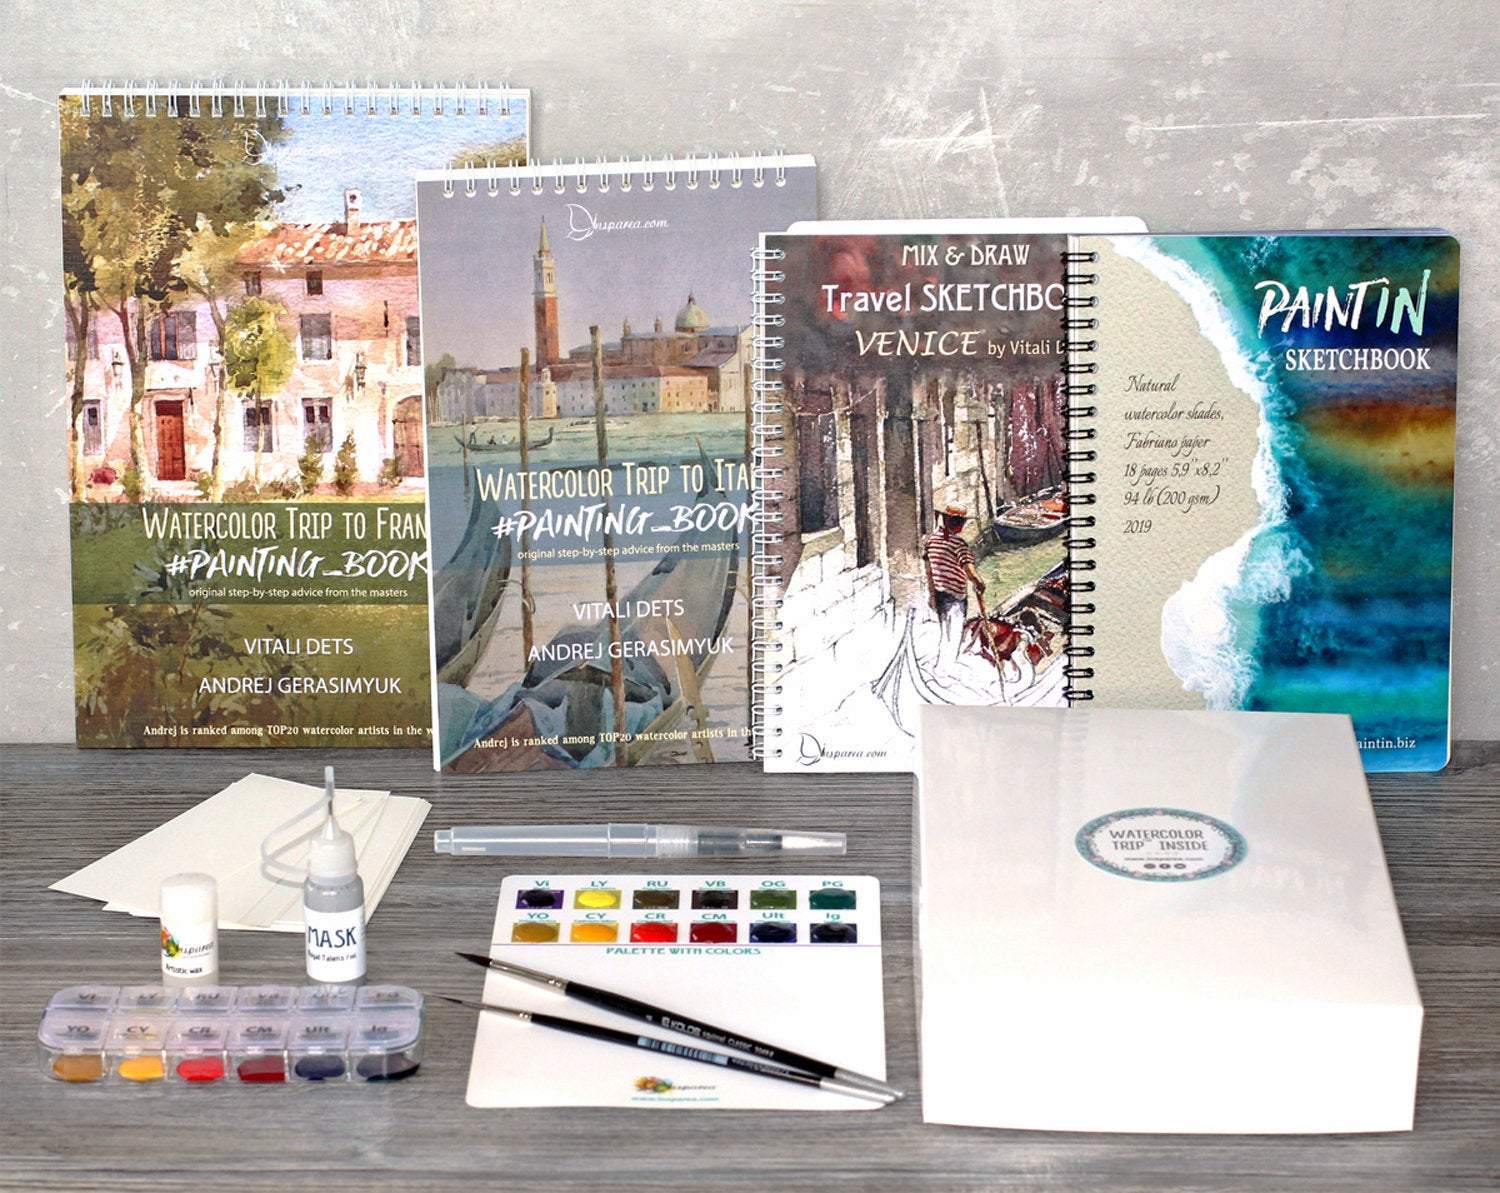 4 products (Italy, France books, Venice & PaintIN sketchbooks)